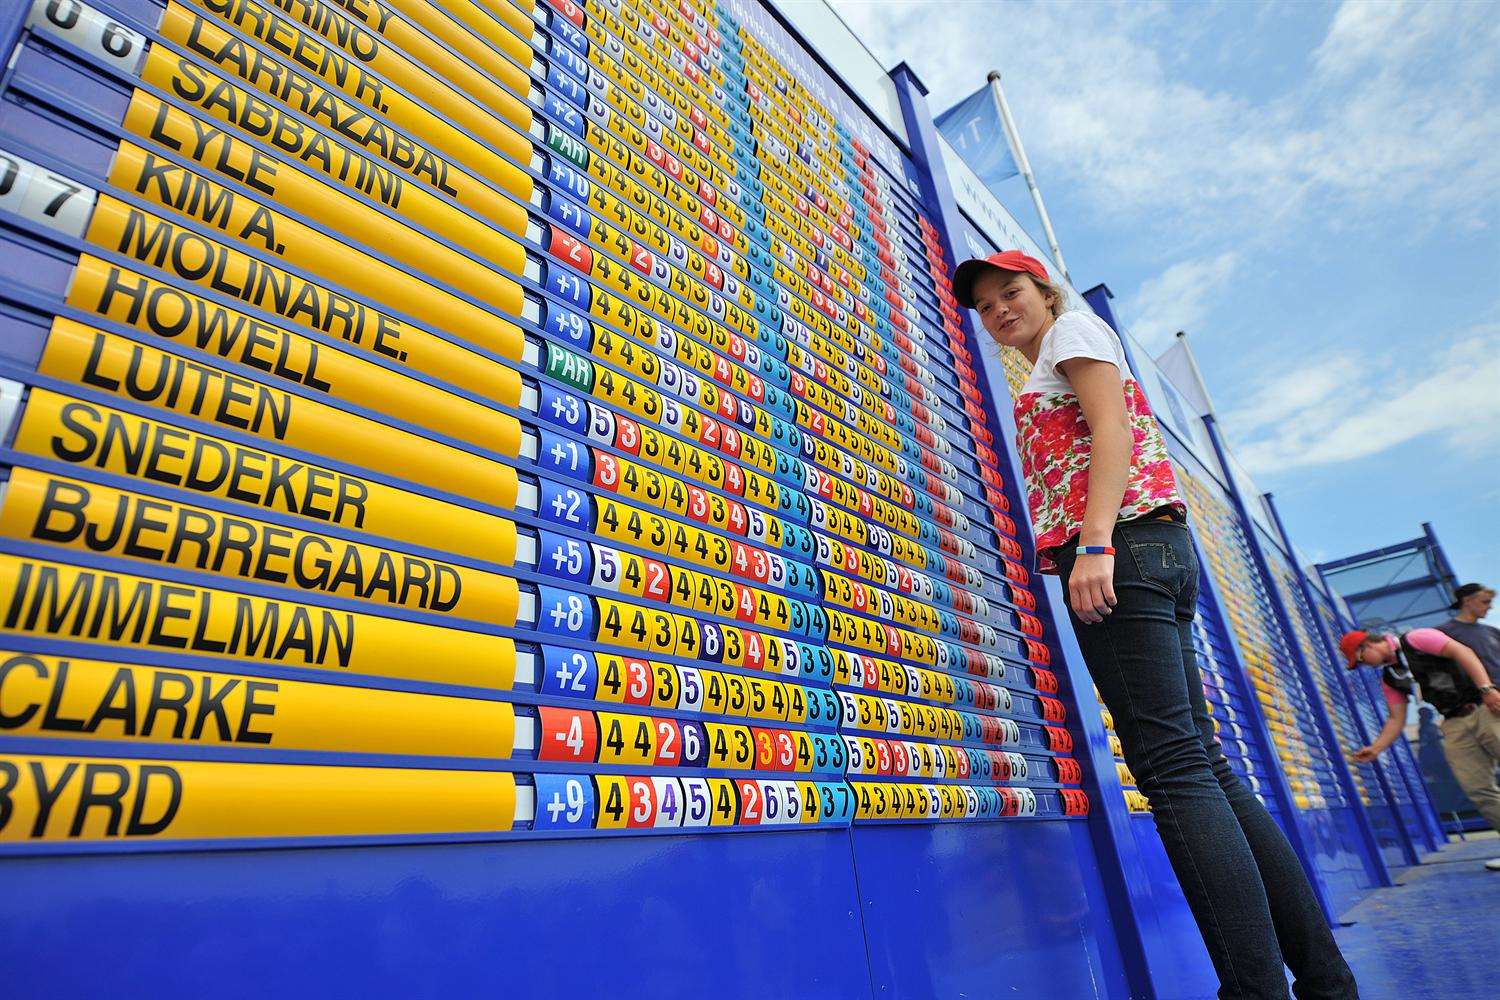 The 2011 Open Championship at Royal St George's